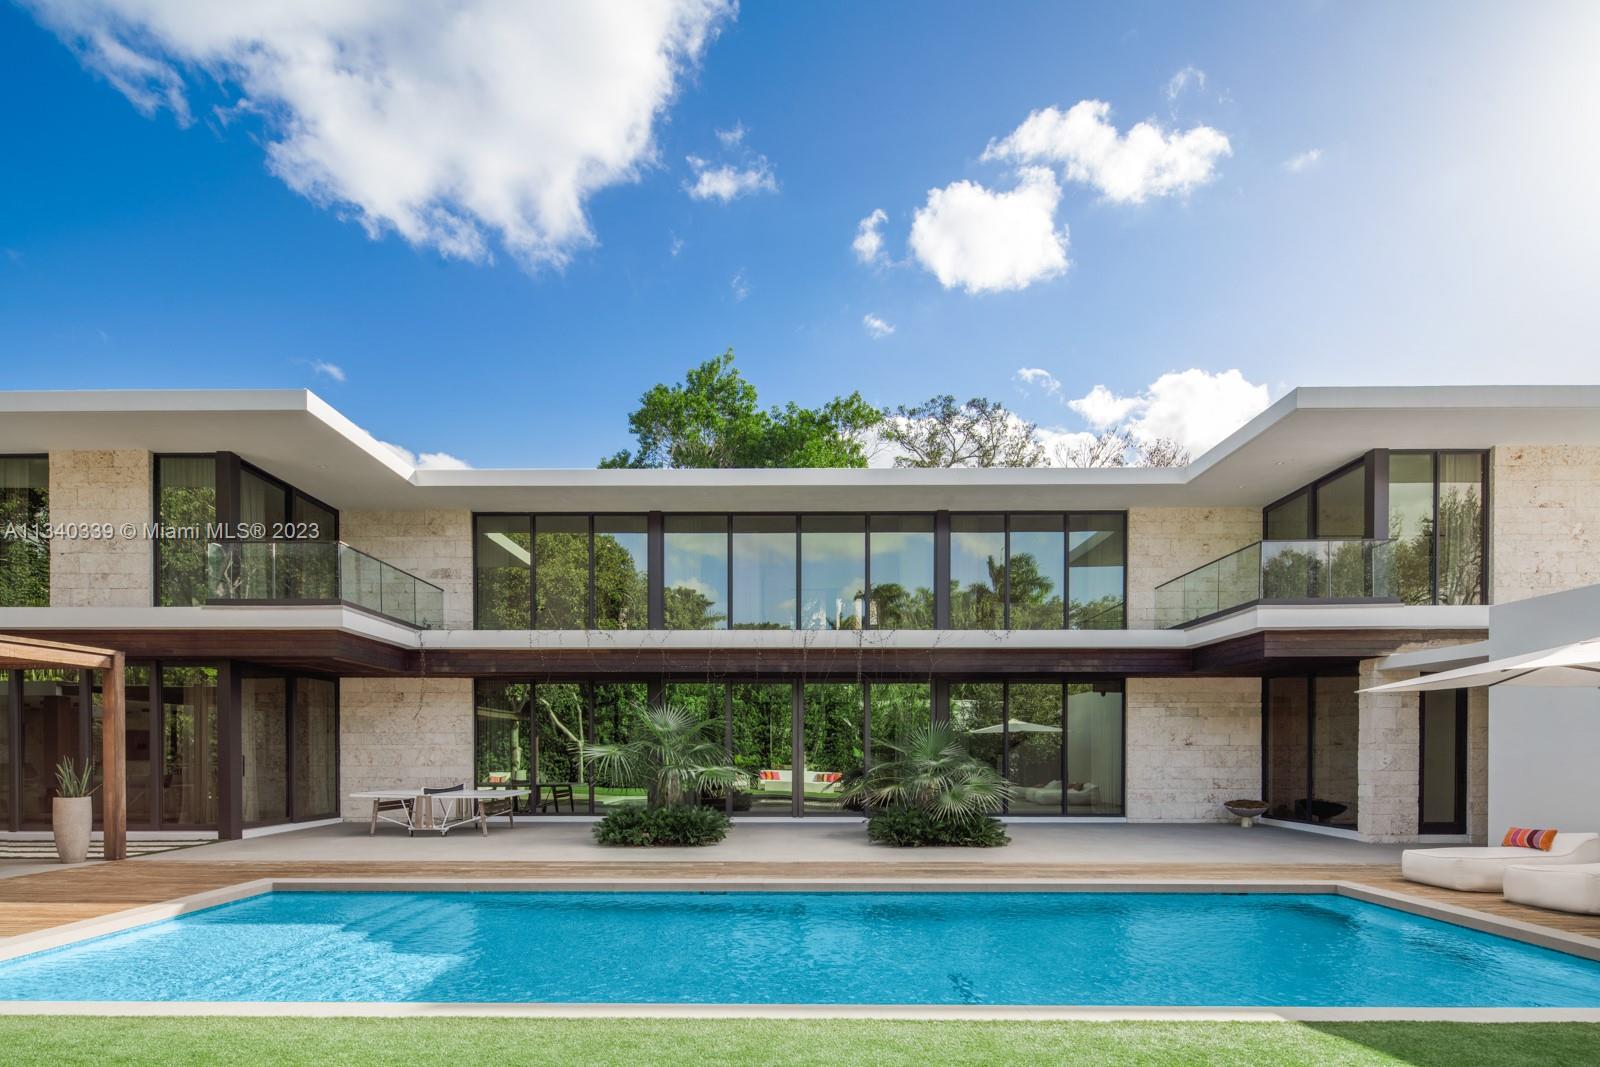 This contemporary residence, designed by the preeminent subtropical modernist architect Max Strang and completed in 2020 in the guard-gated community of Hammock Lakes, takes advantage of its surroundings and climate to embrace the true indoor-outdoor Floridian lifestyle. Inspired by midcentury architecture, with elements such as persiana louvers and deep, overhanging eves for shade, the 7,246 square-foot home offers generous spaces for entertaining on a grand scale with oversized, impact-resistant doors that recess to connect to the sprawling poolside terrace with cabana kitchen, all surrounded by lush native landscaping. Beyond is an elegant grand staircase, a formal dining room, seven bedrooms, a lavish master suite, a two-car garage, and an additional double carport off the main entry.